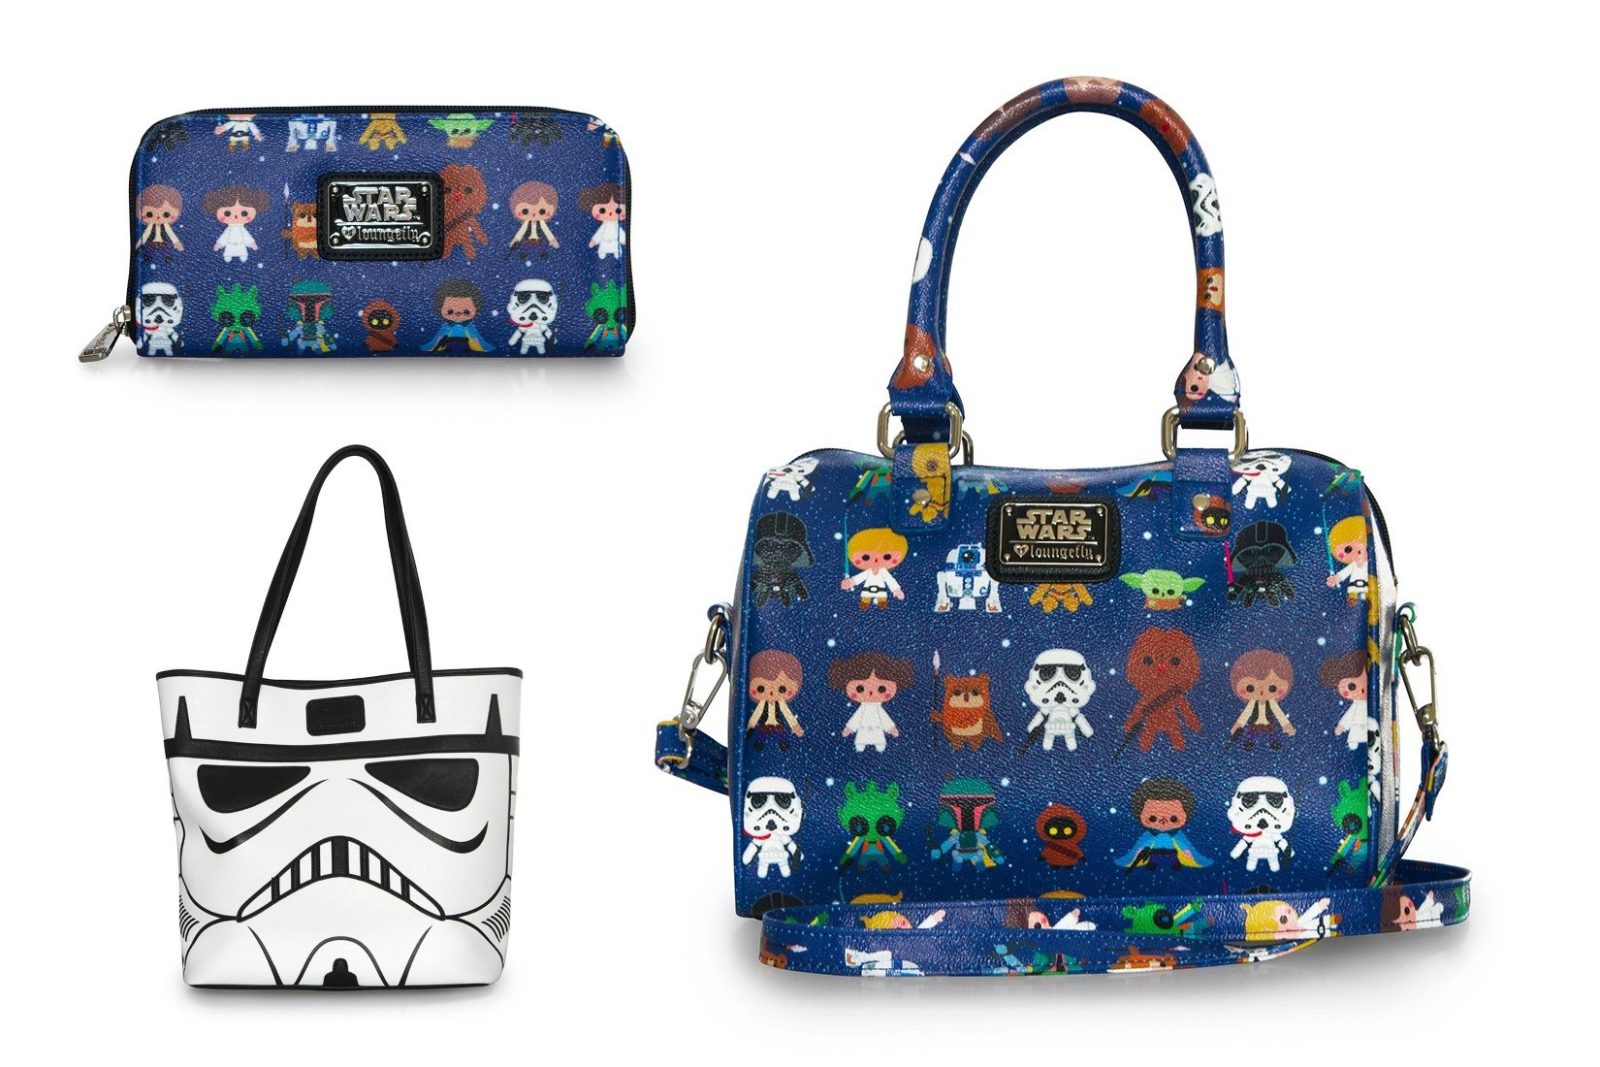 New Loungefly x Star Wars handbags and wallets available